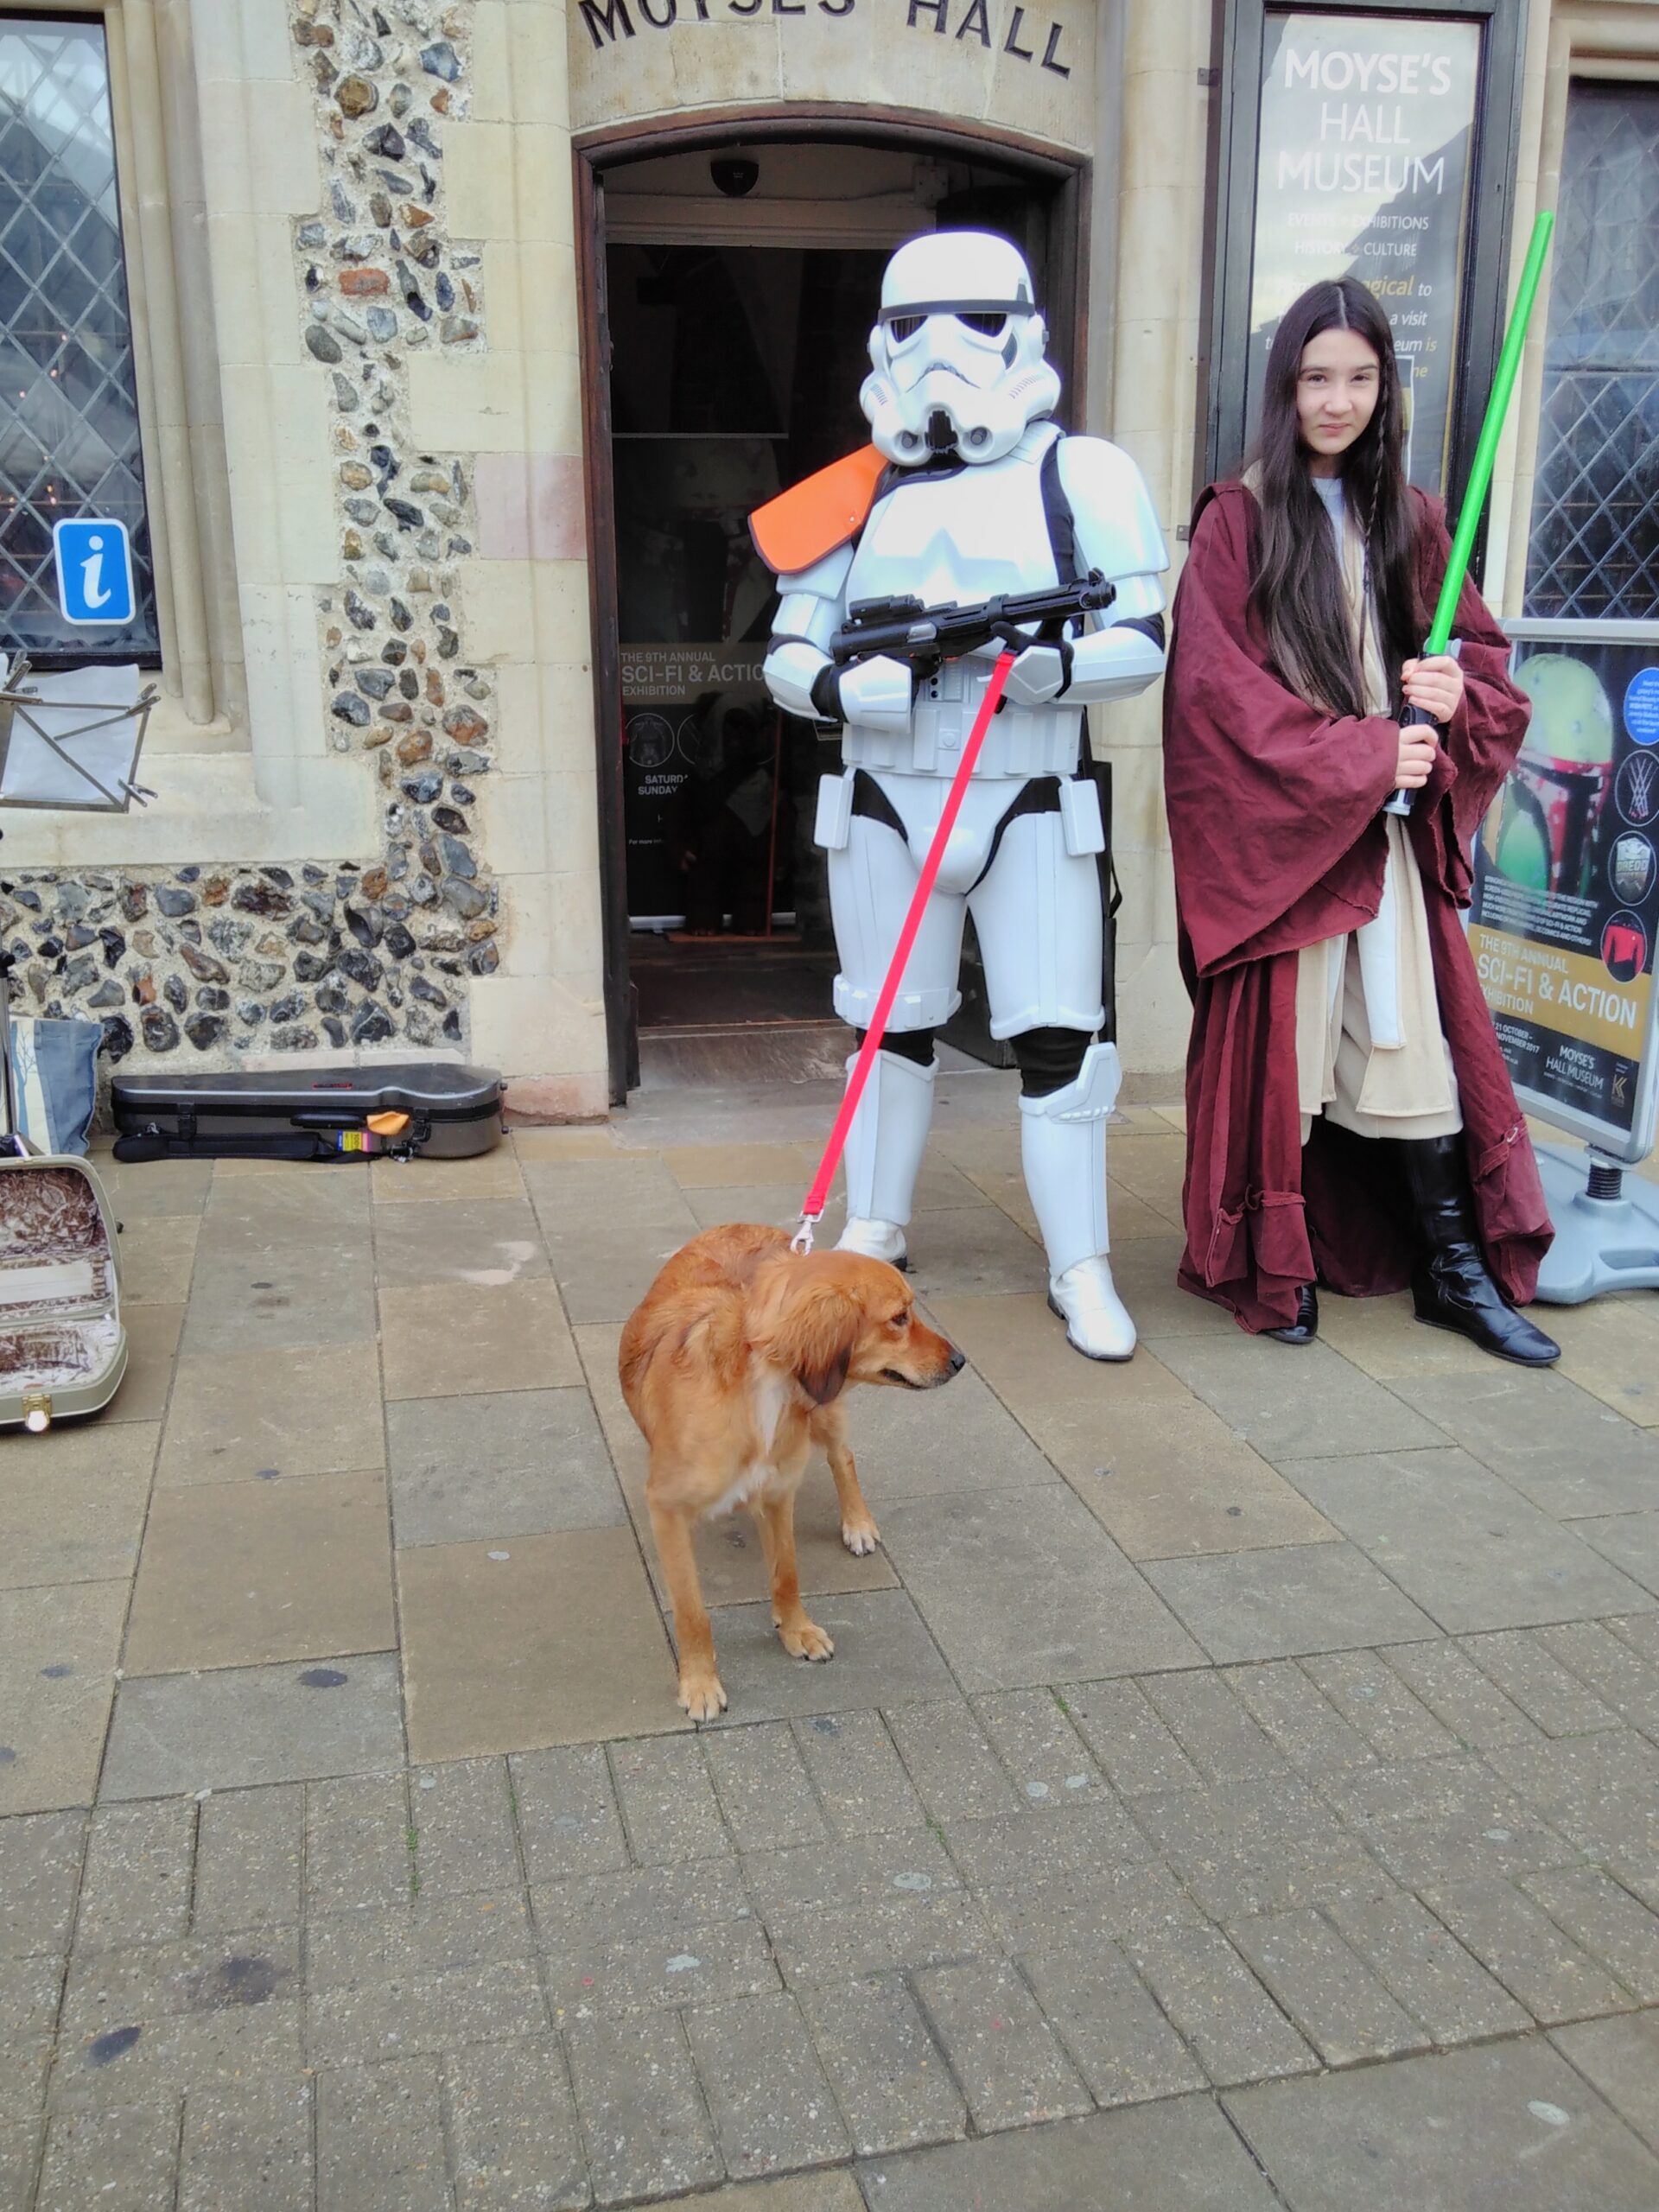 An Imperial Stormtrooper holds the lead of a dog and a teenage girl dressed as a jedi wields a plastic light sabre in front of a mediaeval flint-walled building. Yes, really.